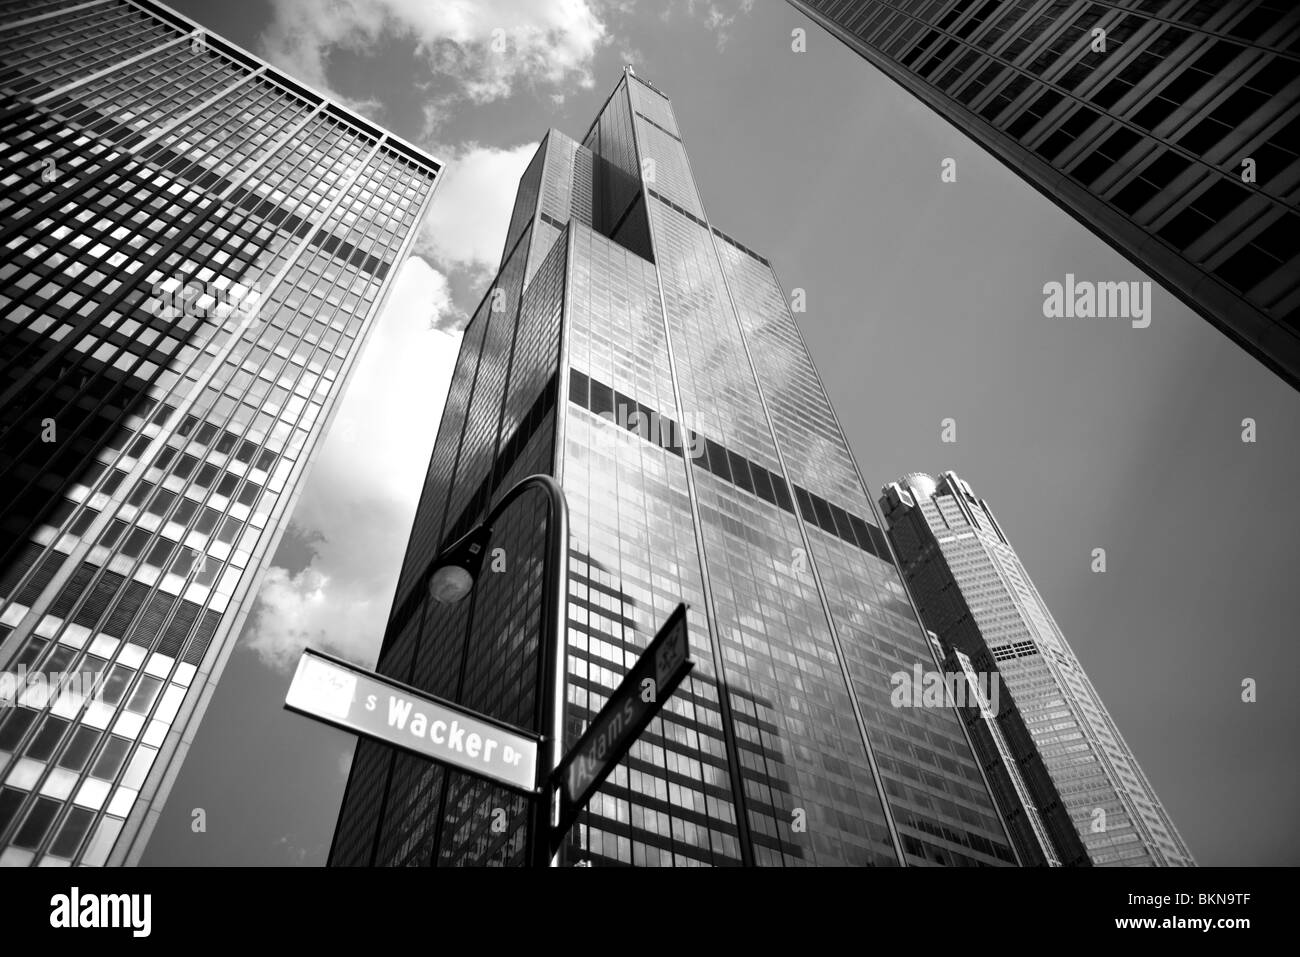 VIEW OF SEARS TOWER FROM THE CORNER OF WACKER DRIVE AND ADAMS STREET IN DOWNTOWN, CHICAGO, ILLINOIS, USA  Stock Photo